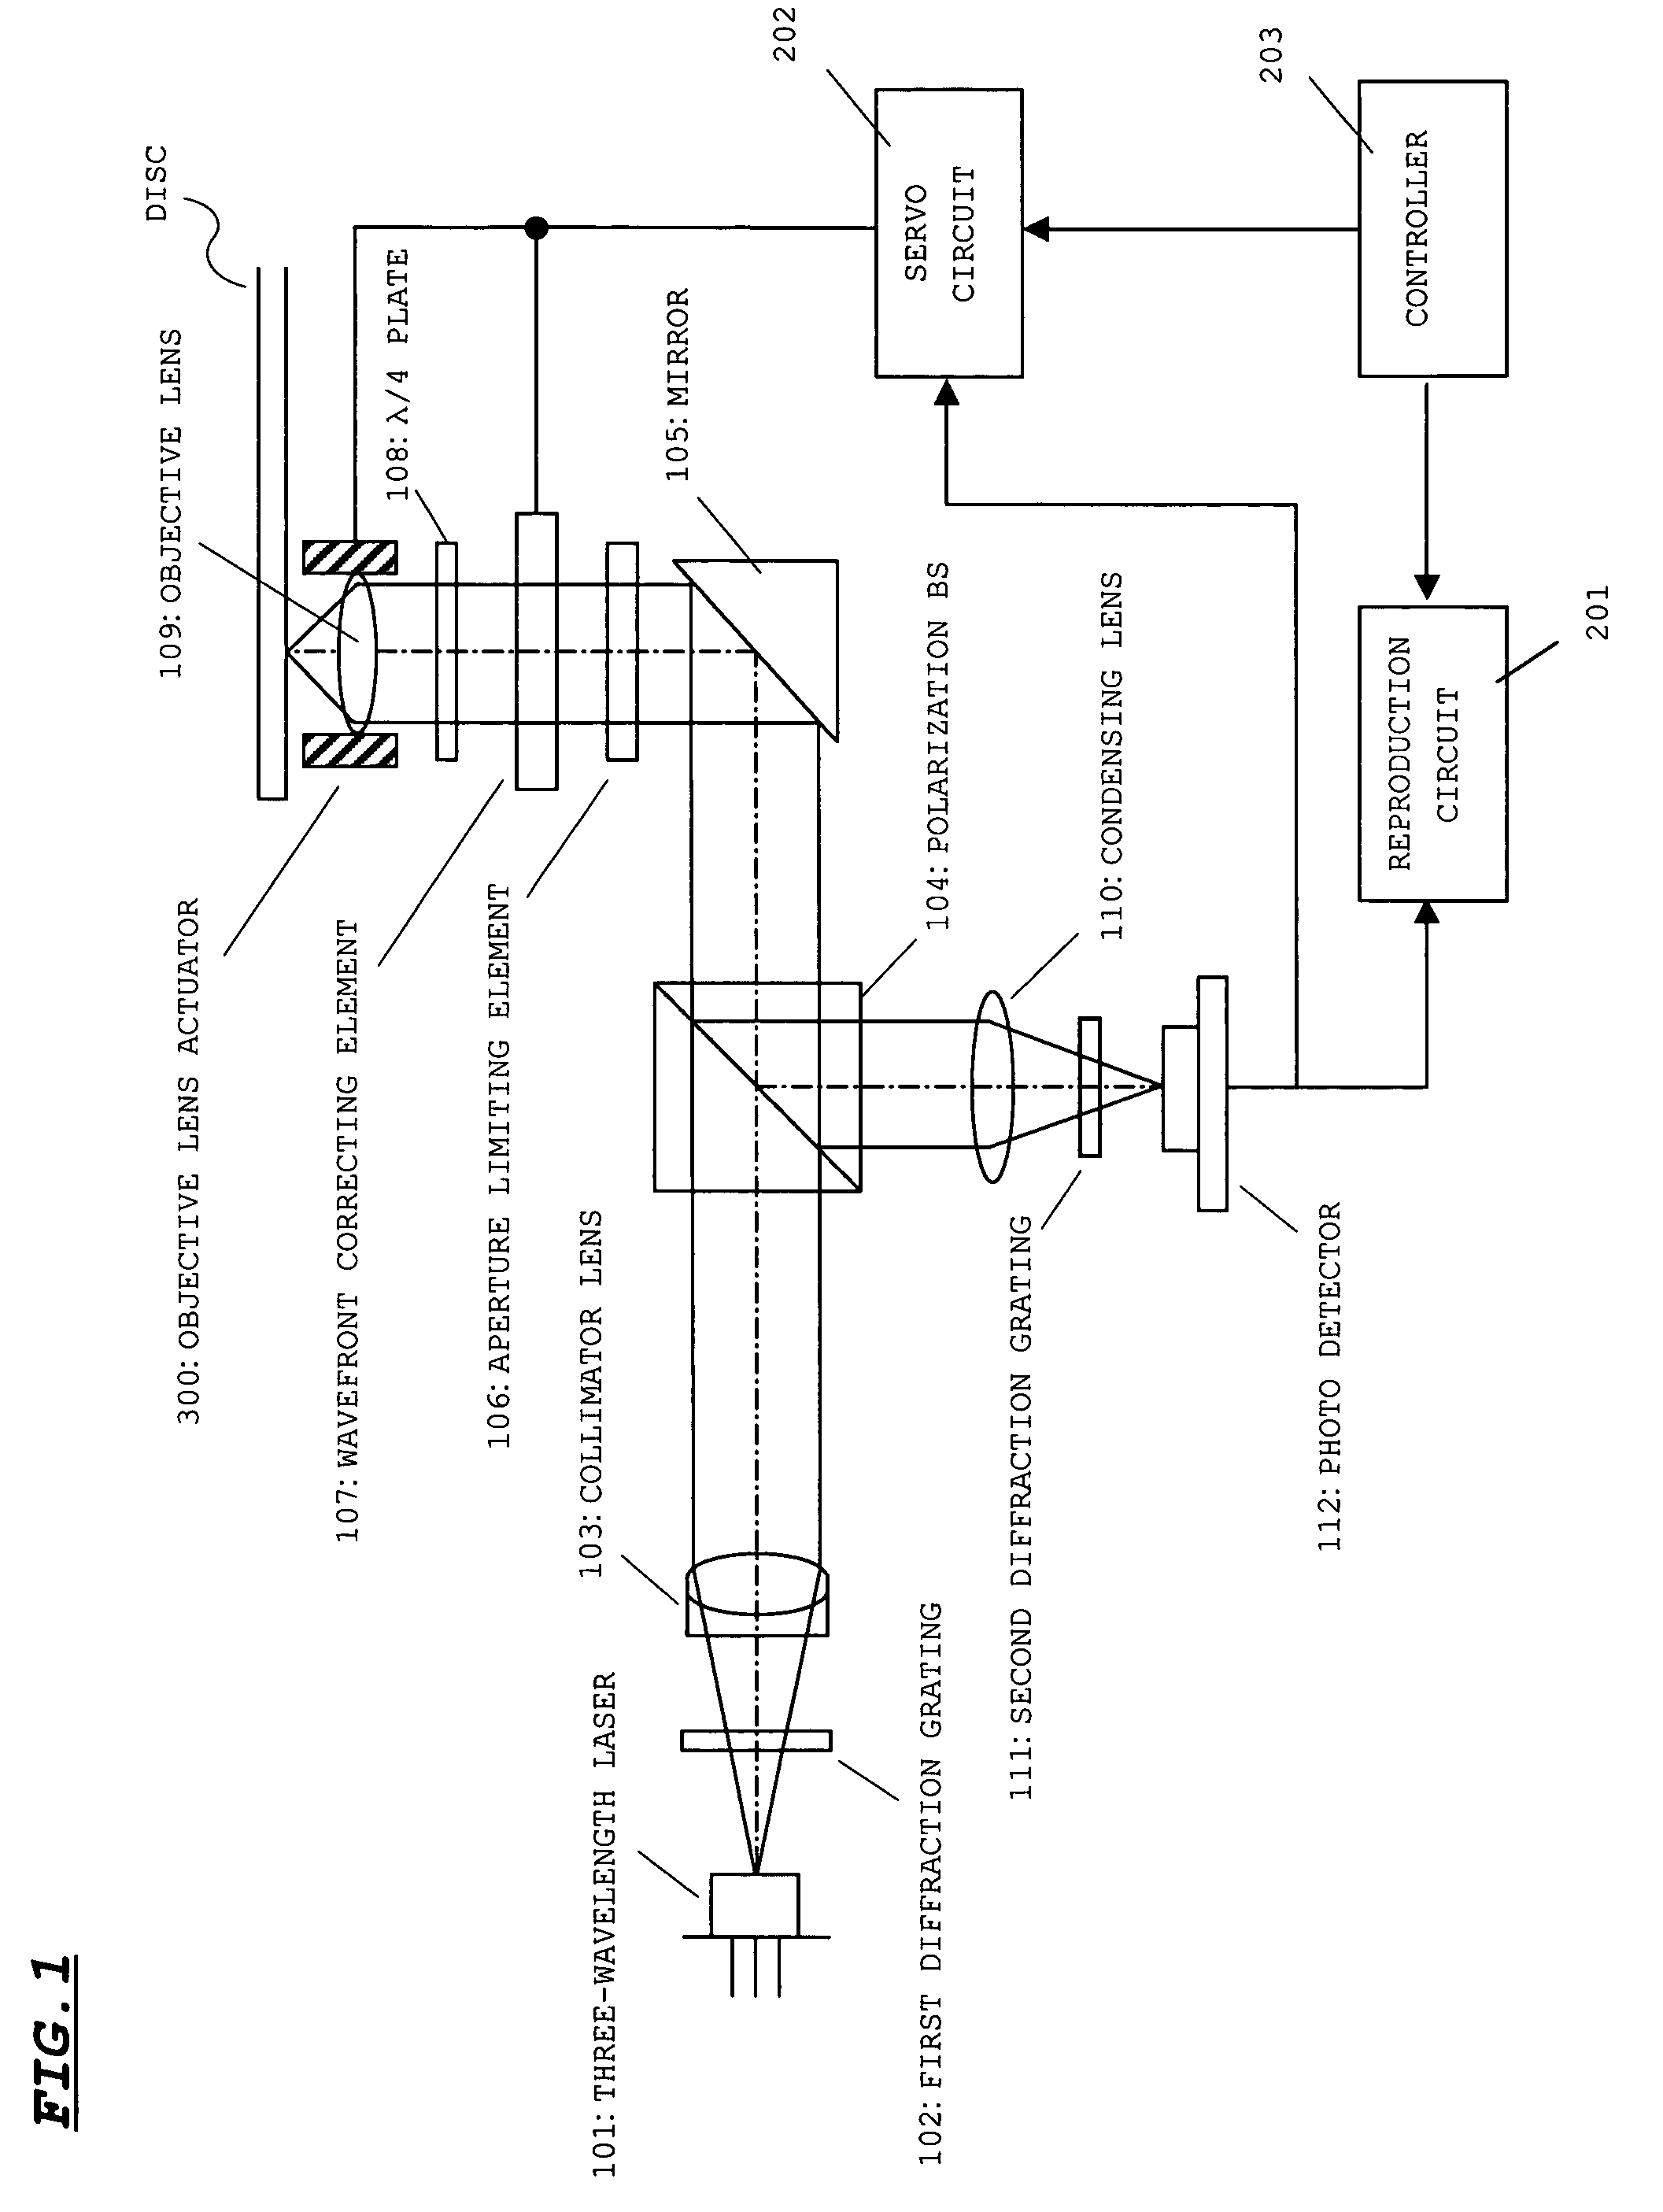 Optical pickup device capable of handling a plurality of laser light beams having different wavelengths